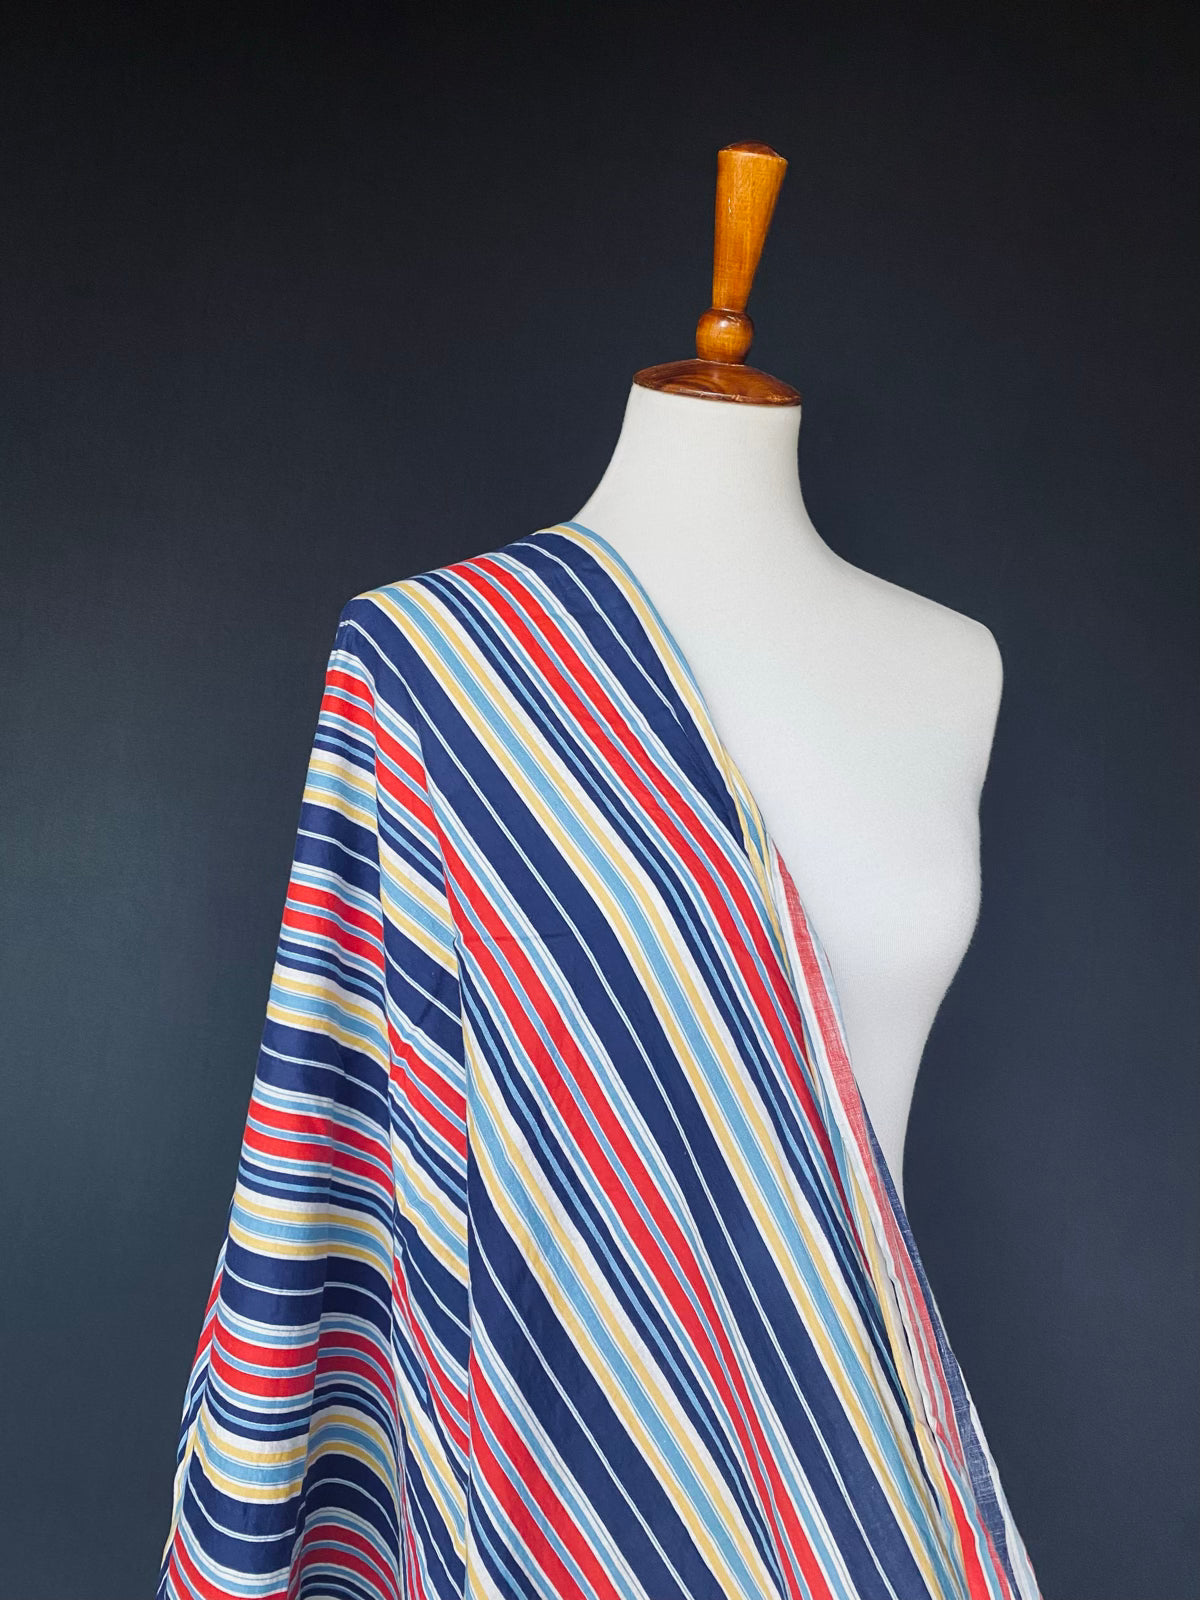 1930s-1940s Primary Colors Striped Fabric